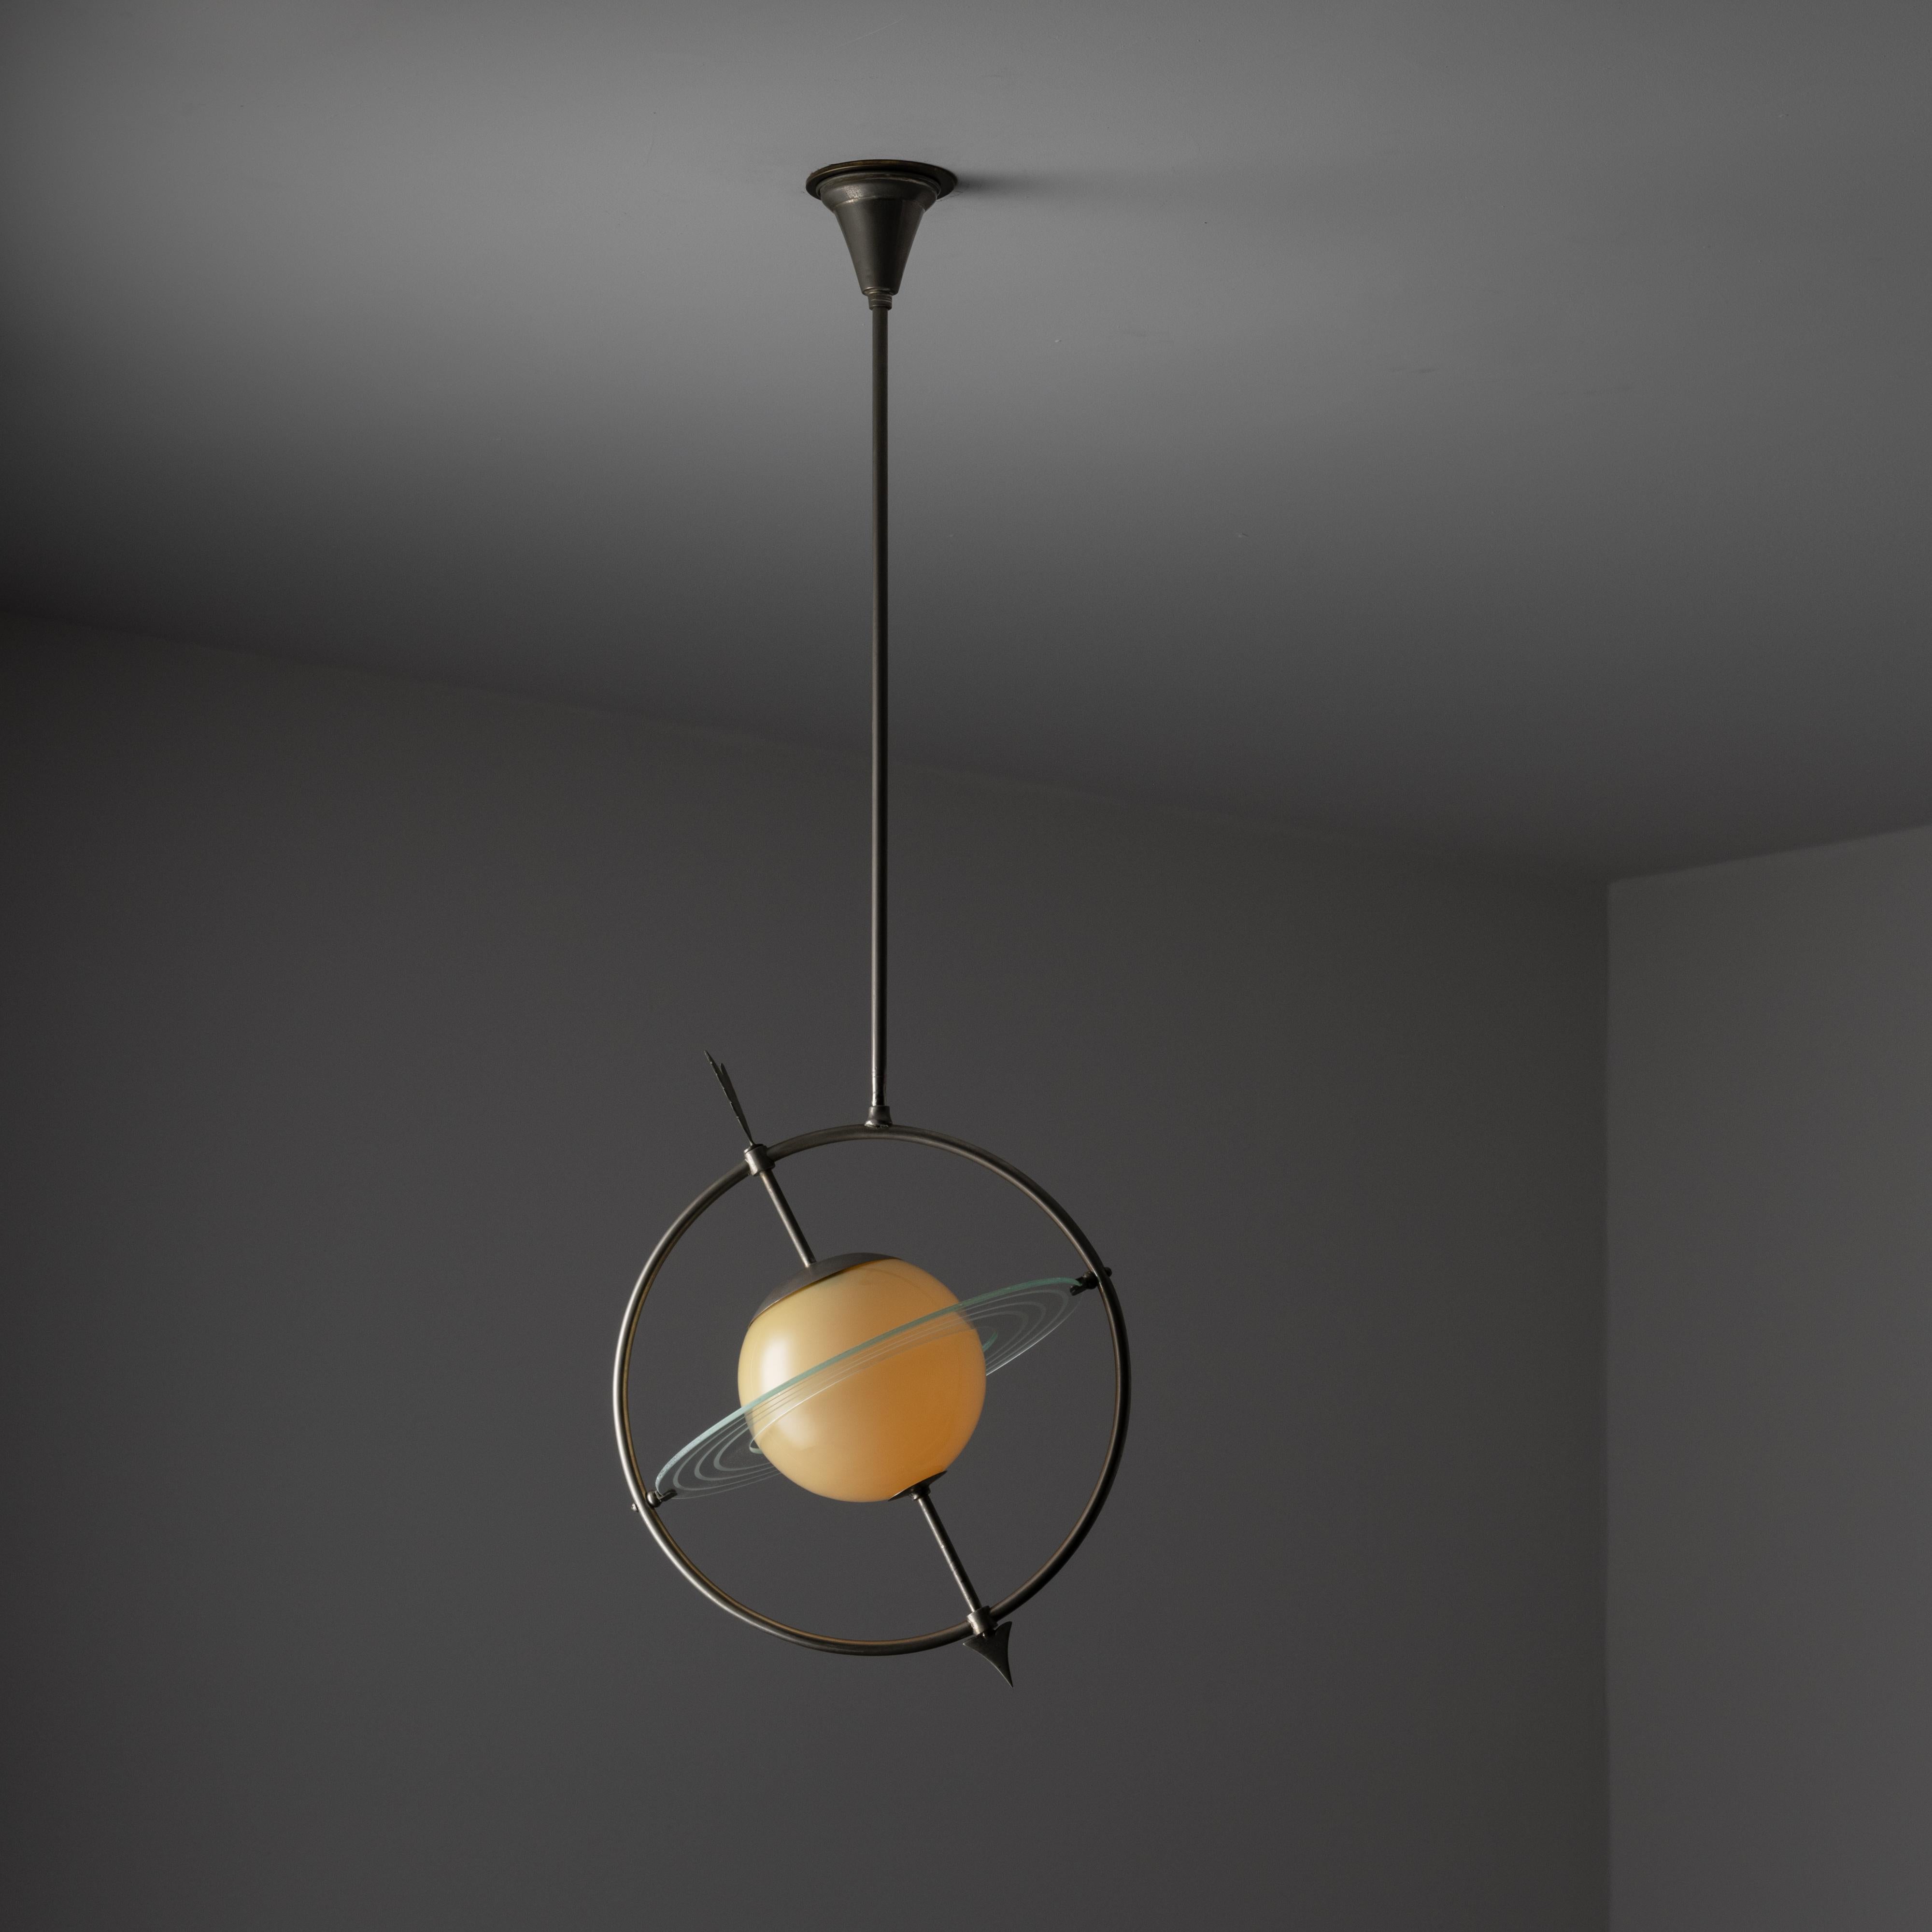 Rare Ceiling Light by Gio Ponti and Pietro Chiesa for Fontana Arte. Designed and manufactured in Italy, circa the 1930s. Unique sculptural 'Saturn' ceiling light, with illustrative metal frame depicting an arrow piercing a milk glass globe with